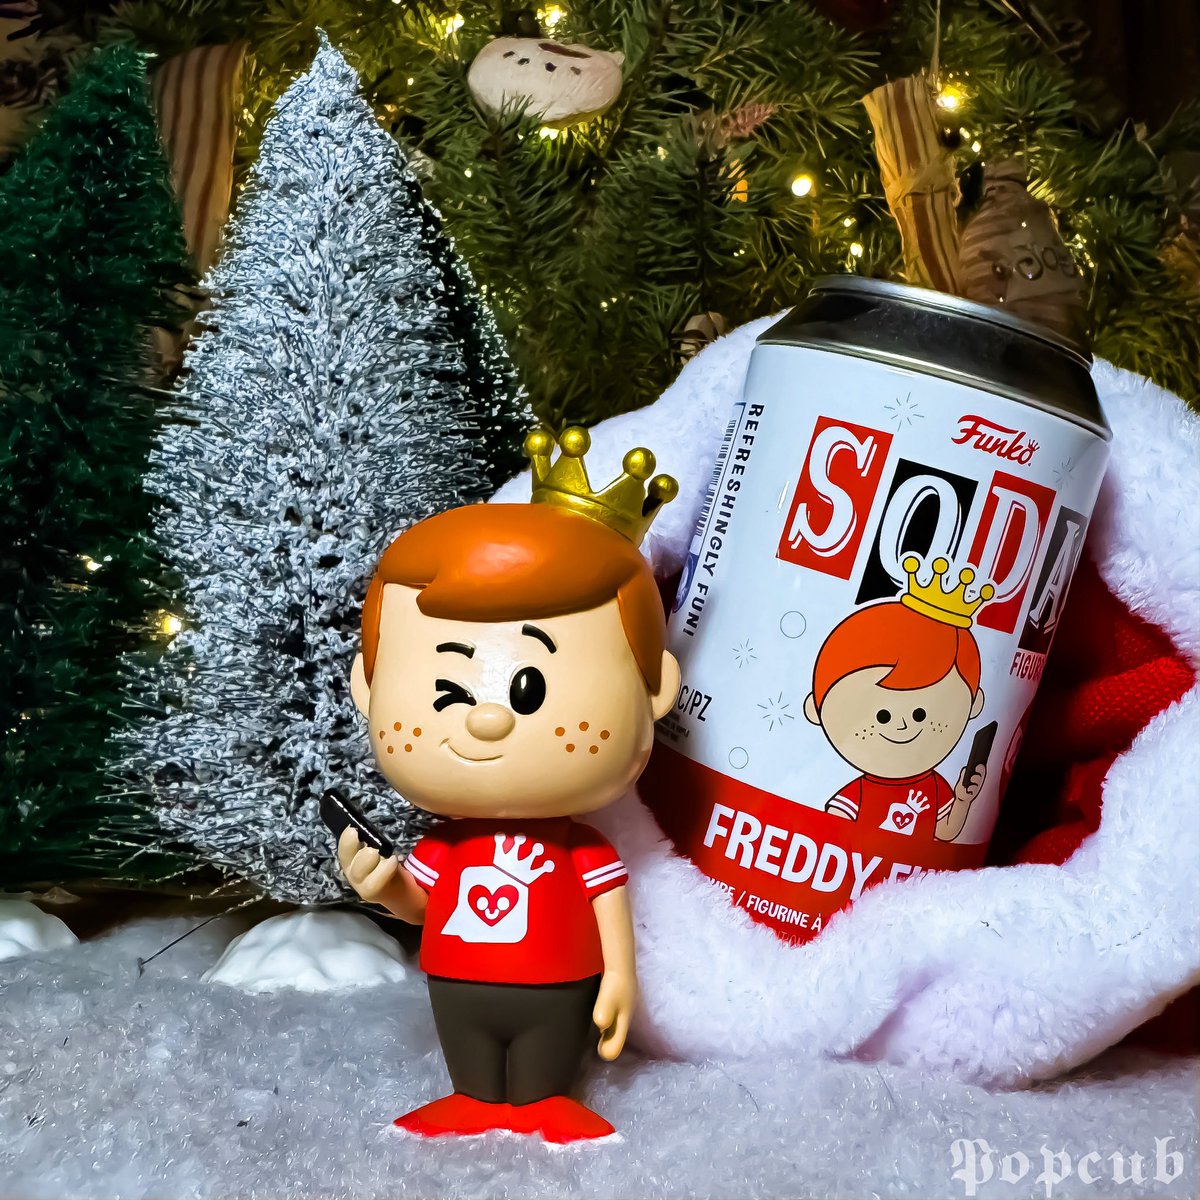 My favorite #stockingstuffer of all time! I won this for last years December photo a day challenge and couldn’t be more thankful @originalfunko 
👑 @OriginalFunko
📓 #MyFunkoStory 
📸 #FunkoPhotoADayChallenge
#FOTW #FunaticoftheWeek